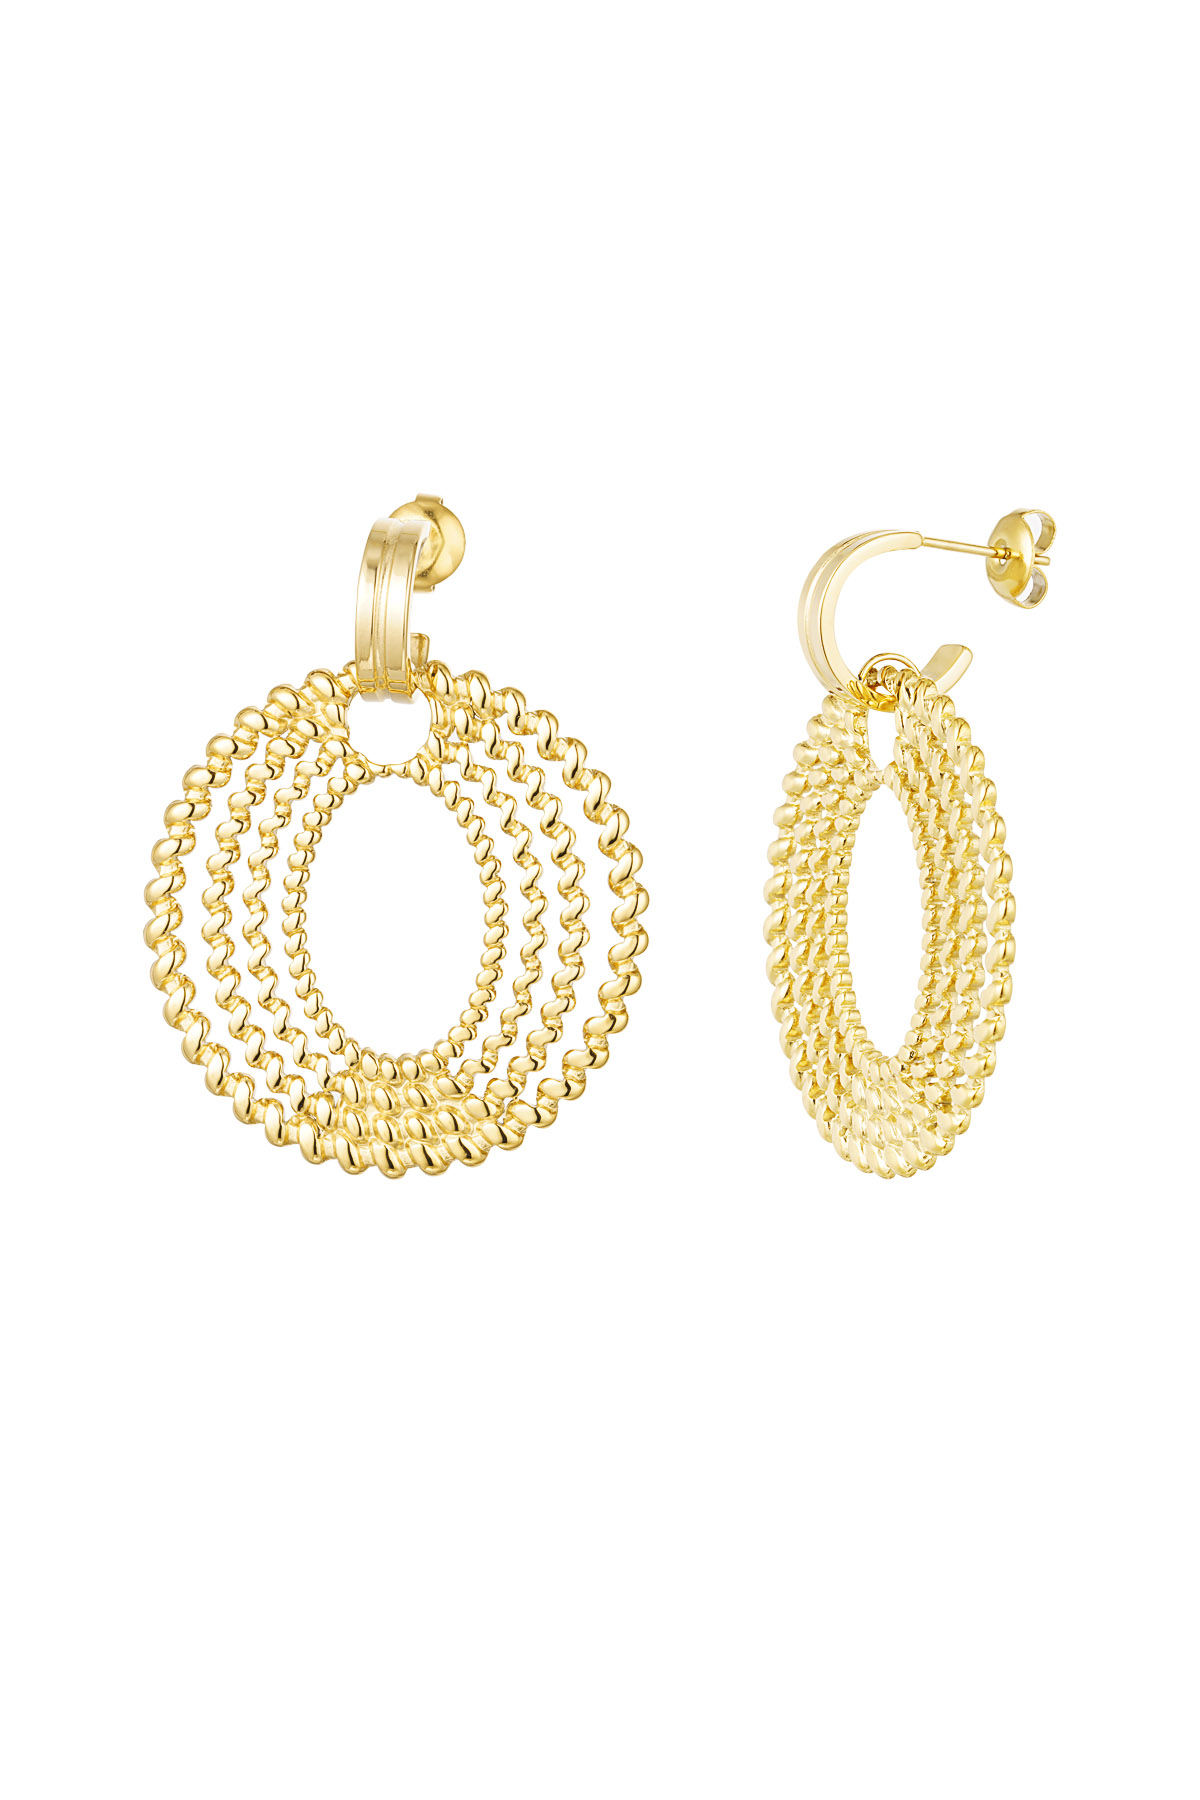 Curled earrings - gold